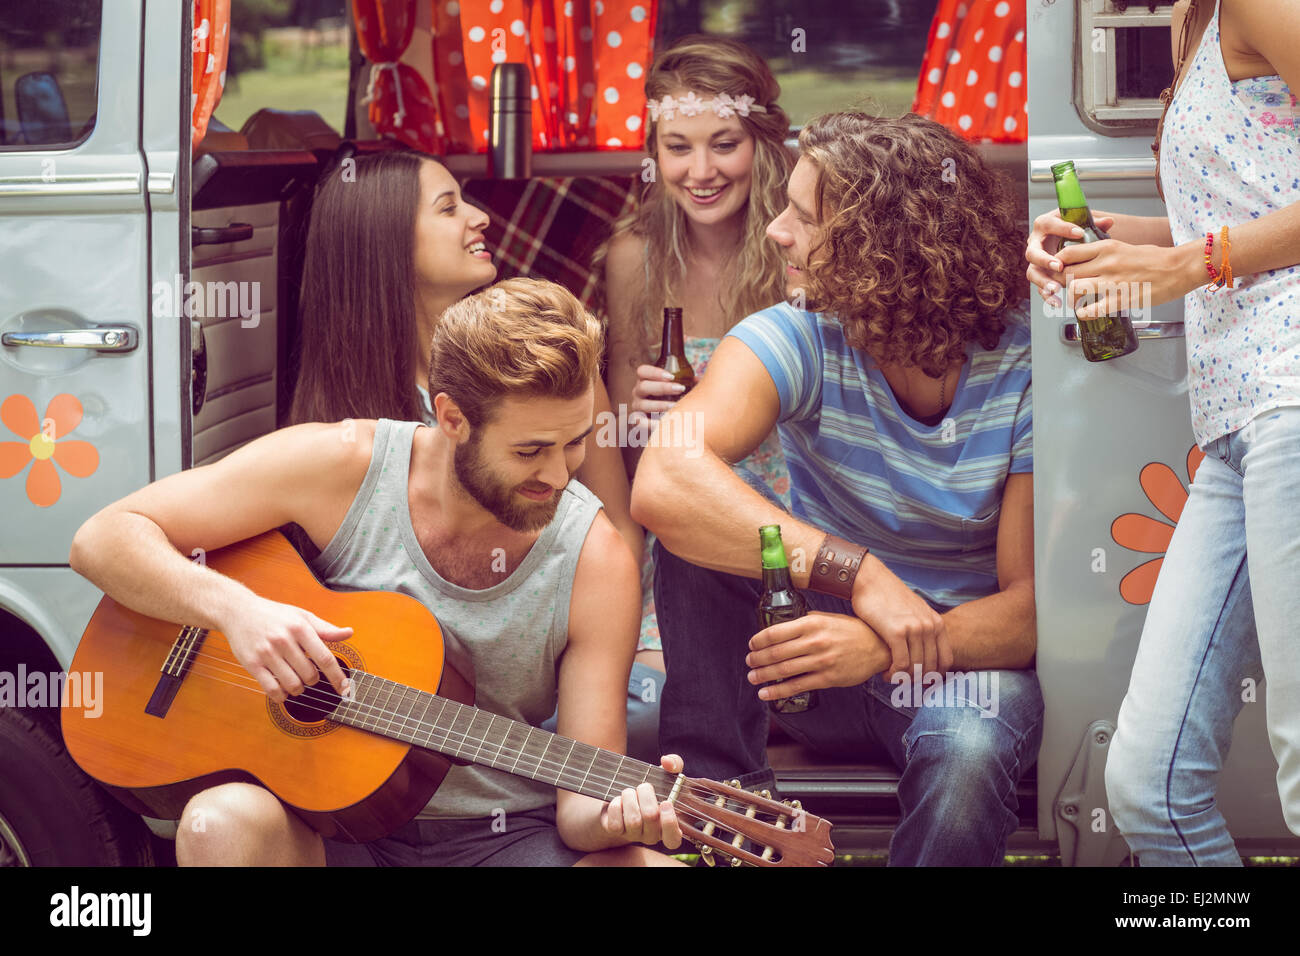 Hipster friends in camper van at festival Stock Photo